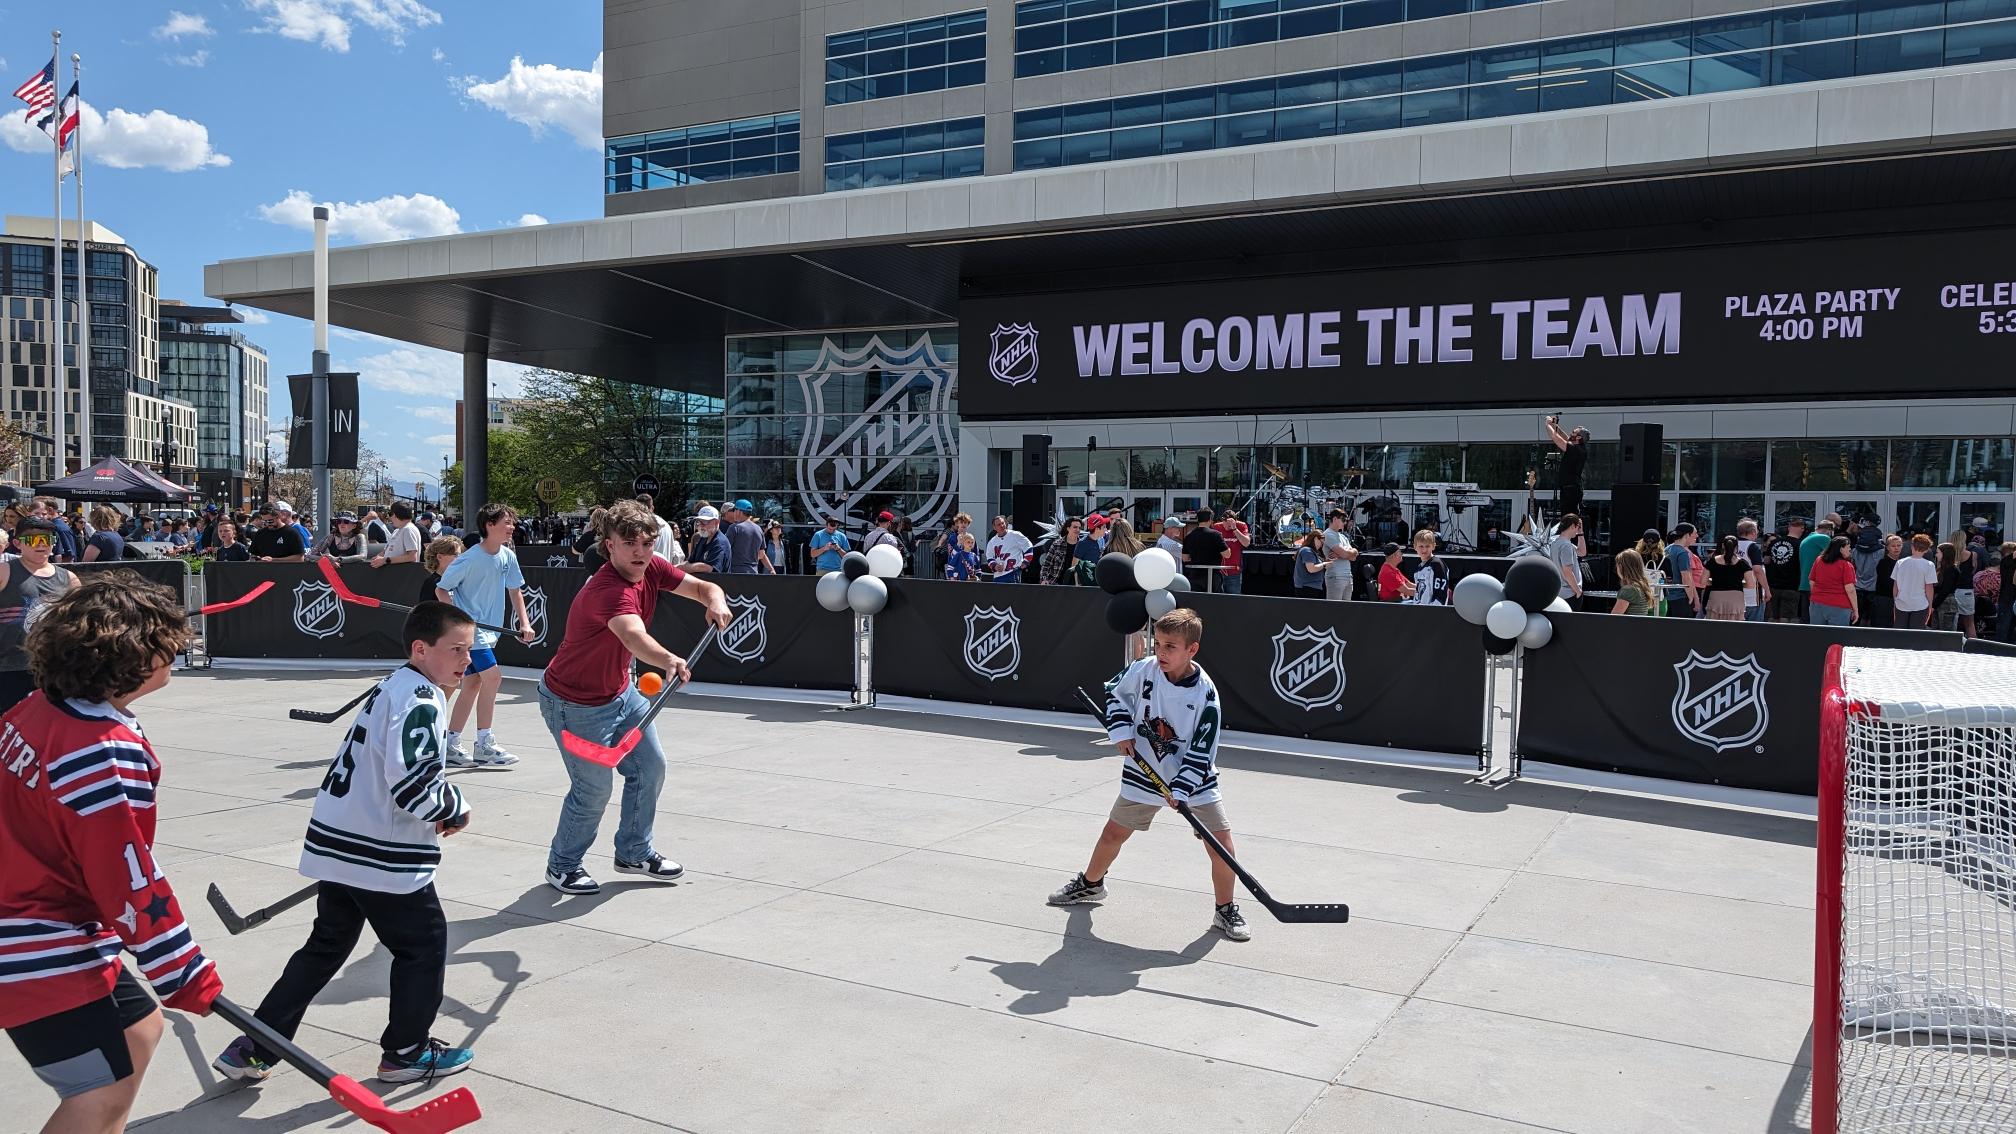 Ahead of the NHL to Utah party on Wednesday, Utahns crowded the plaza of the Delta Center and waite...